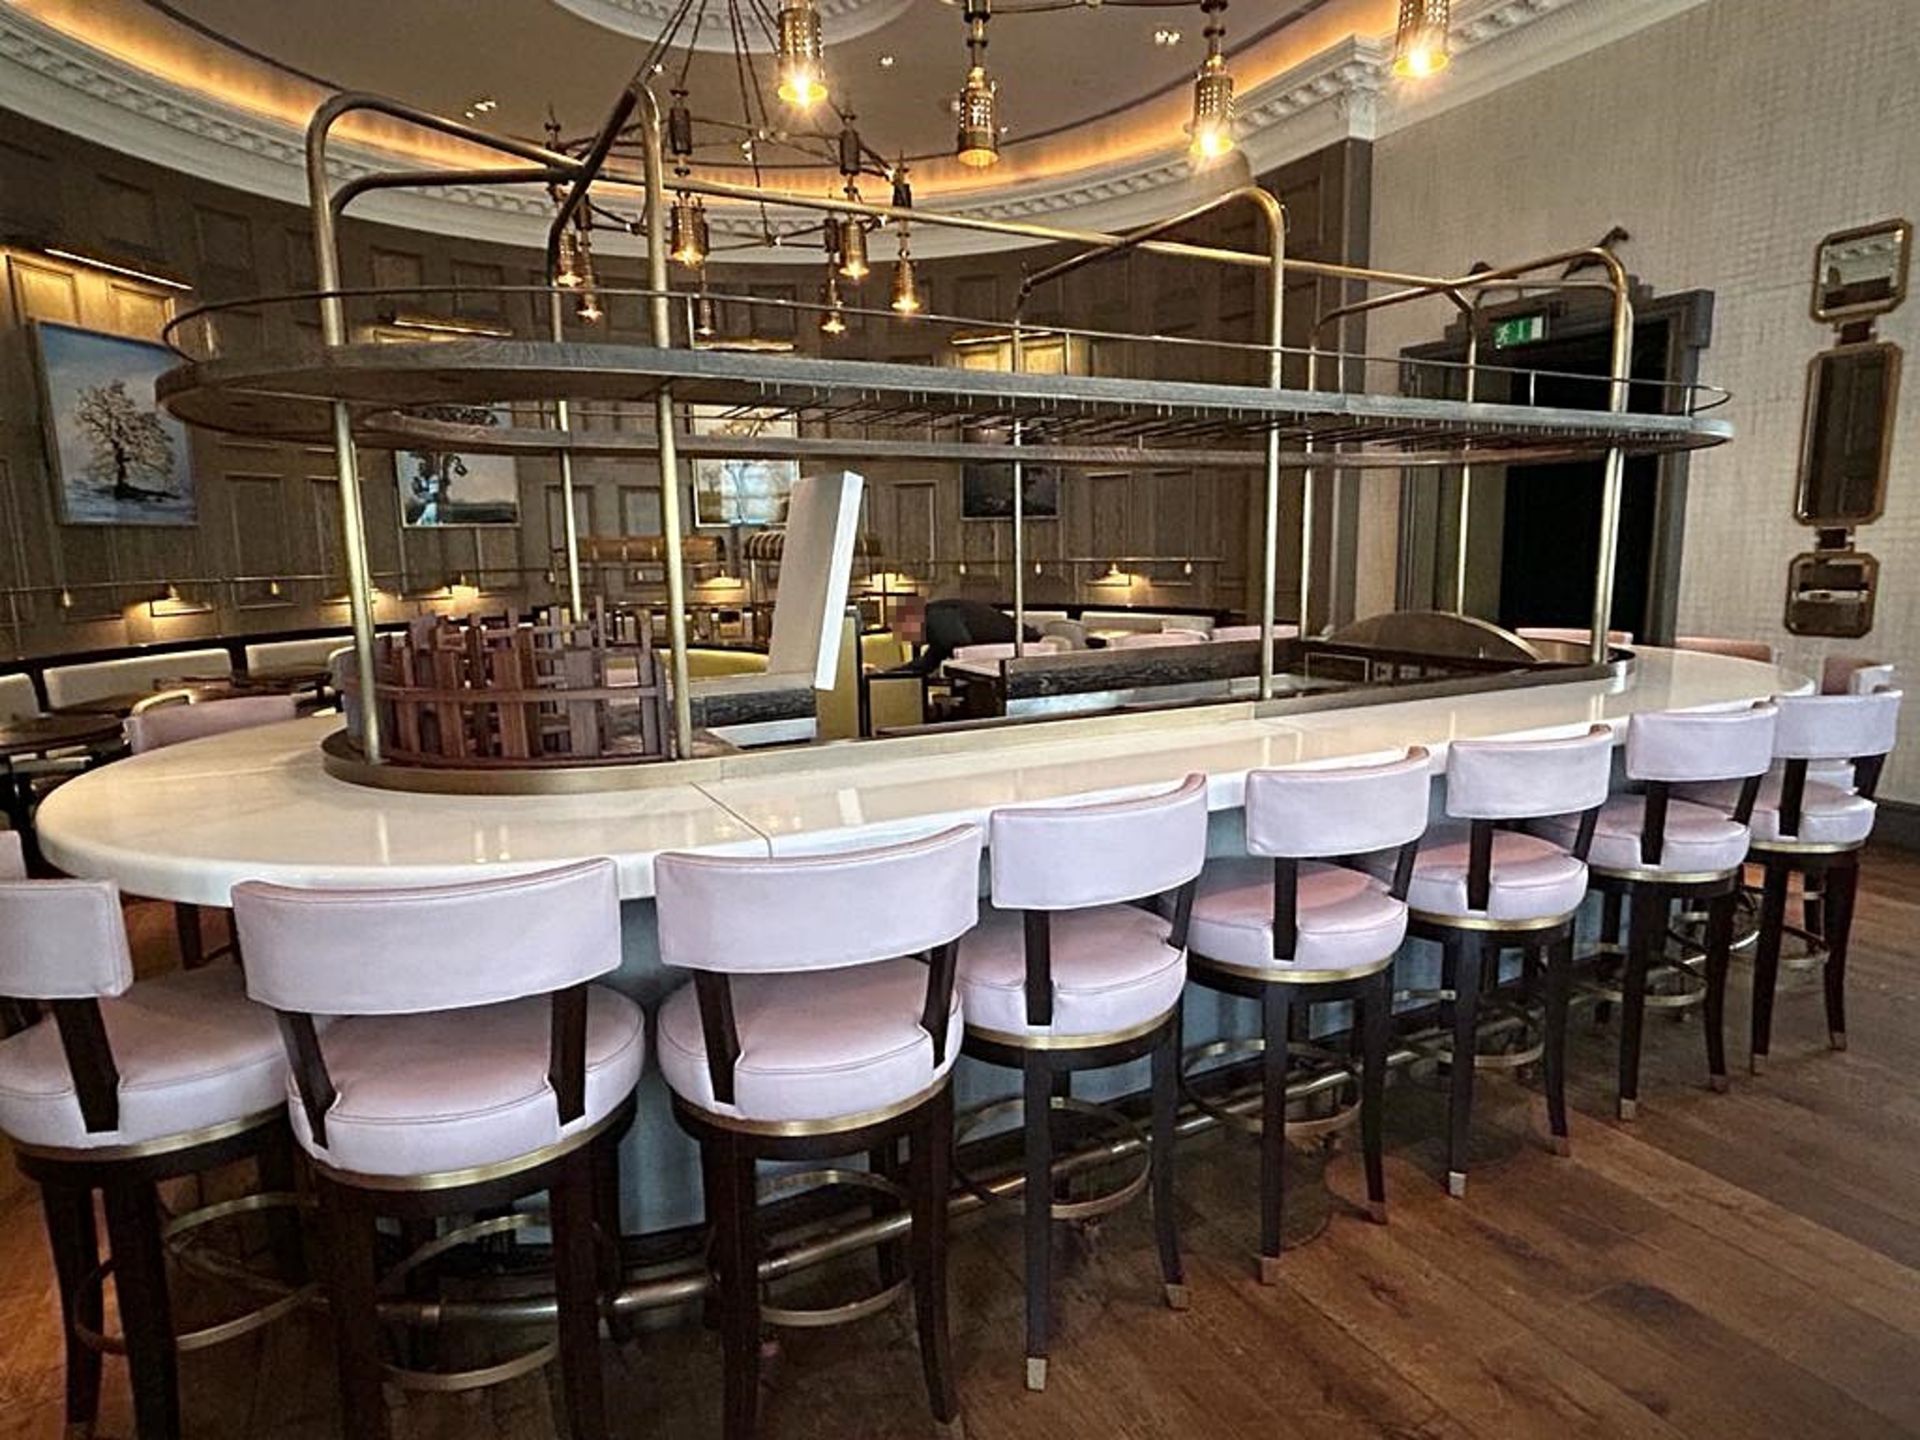 1 x Luxury Curved Restaurant 5.5-Metre Centrepiece Bar, Clad in Timber & Leather with 18 x Stools - Image 3 of 72